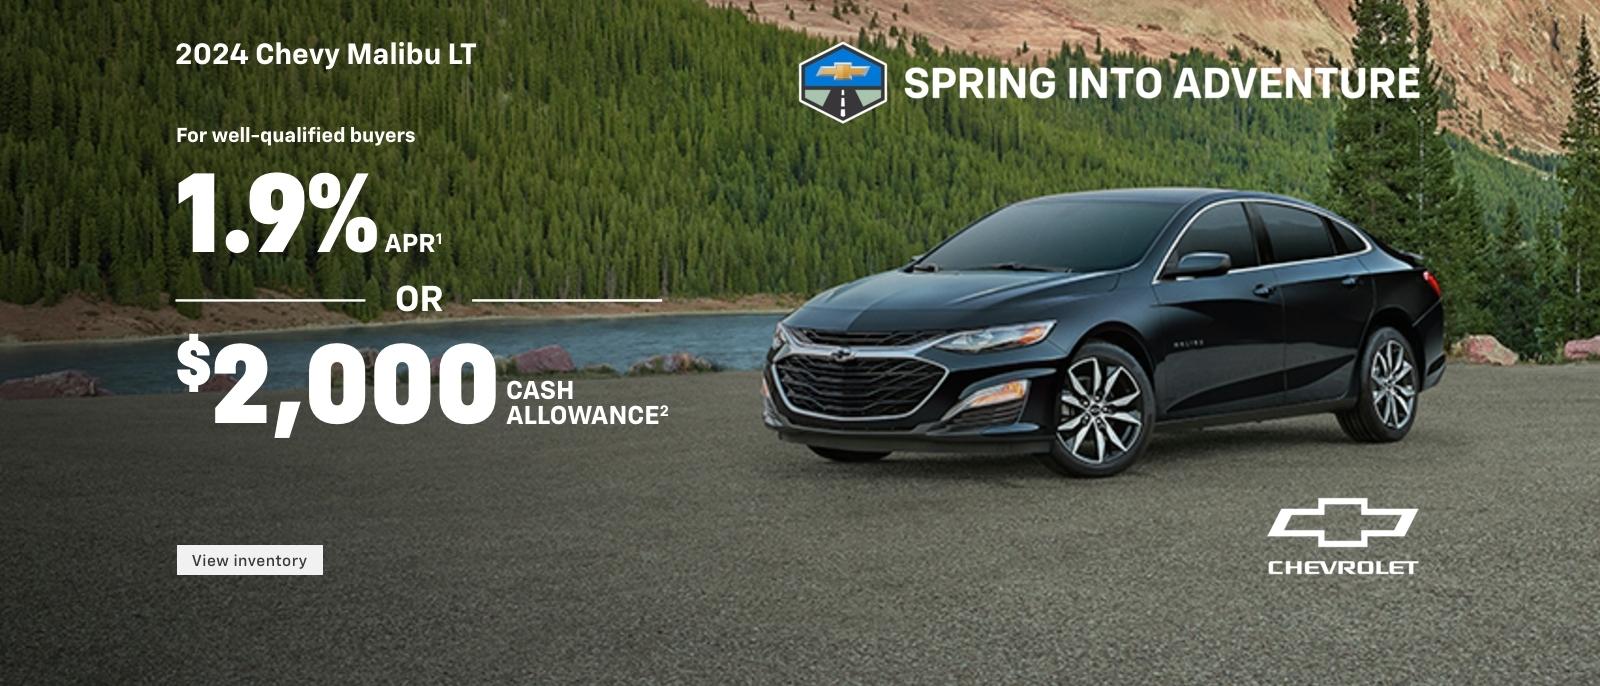 2024 Chevy Malibu LT. Spring into Adventure. For well-qualified buyers 1.9% APR when you finance with GM Financial. Or, $2,000 cash allowance.